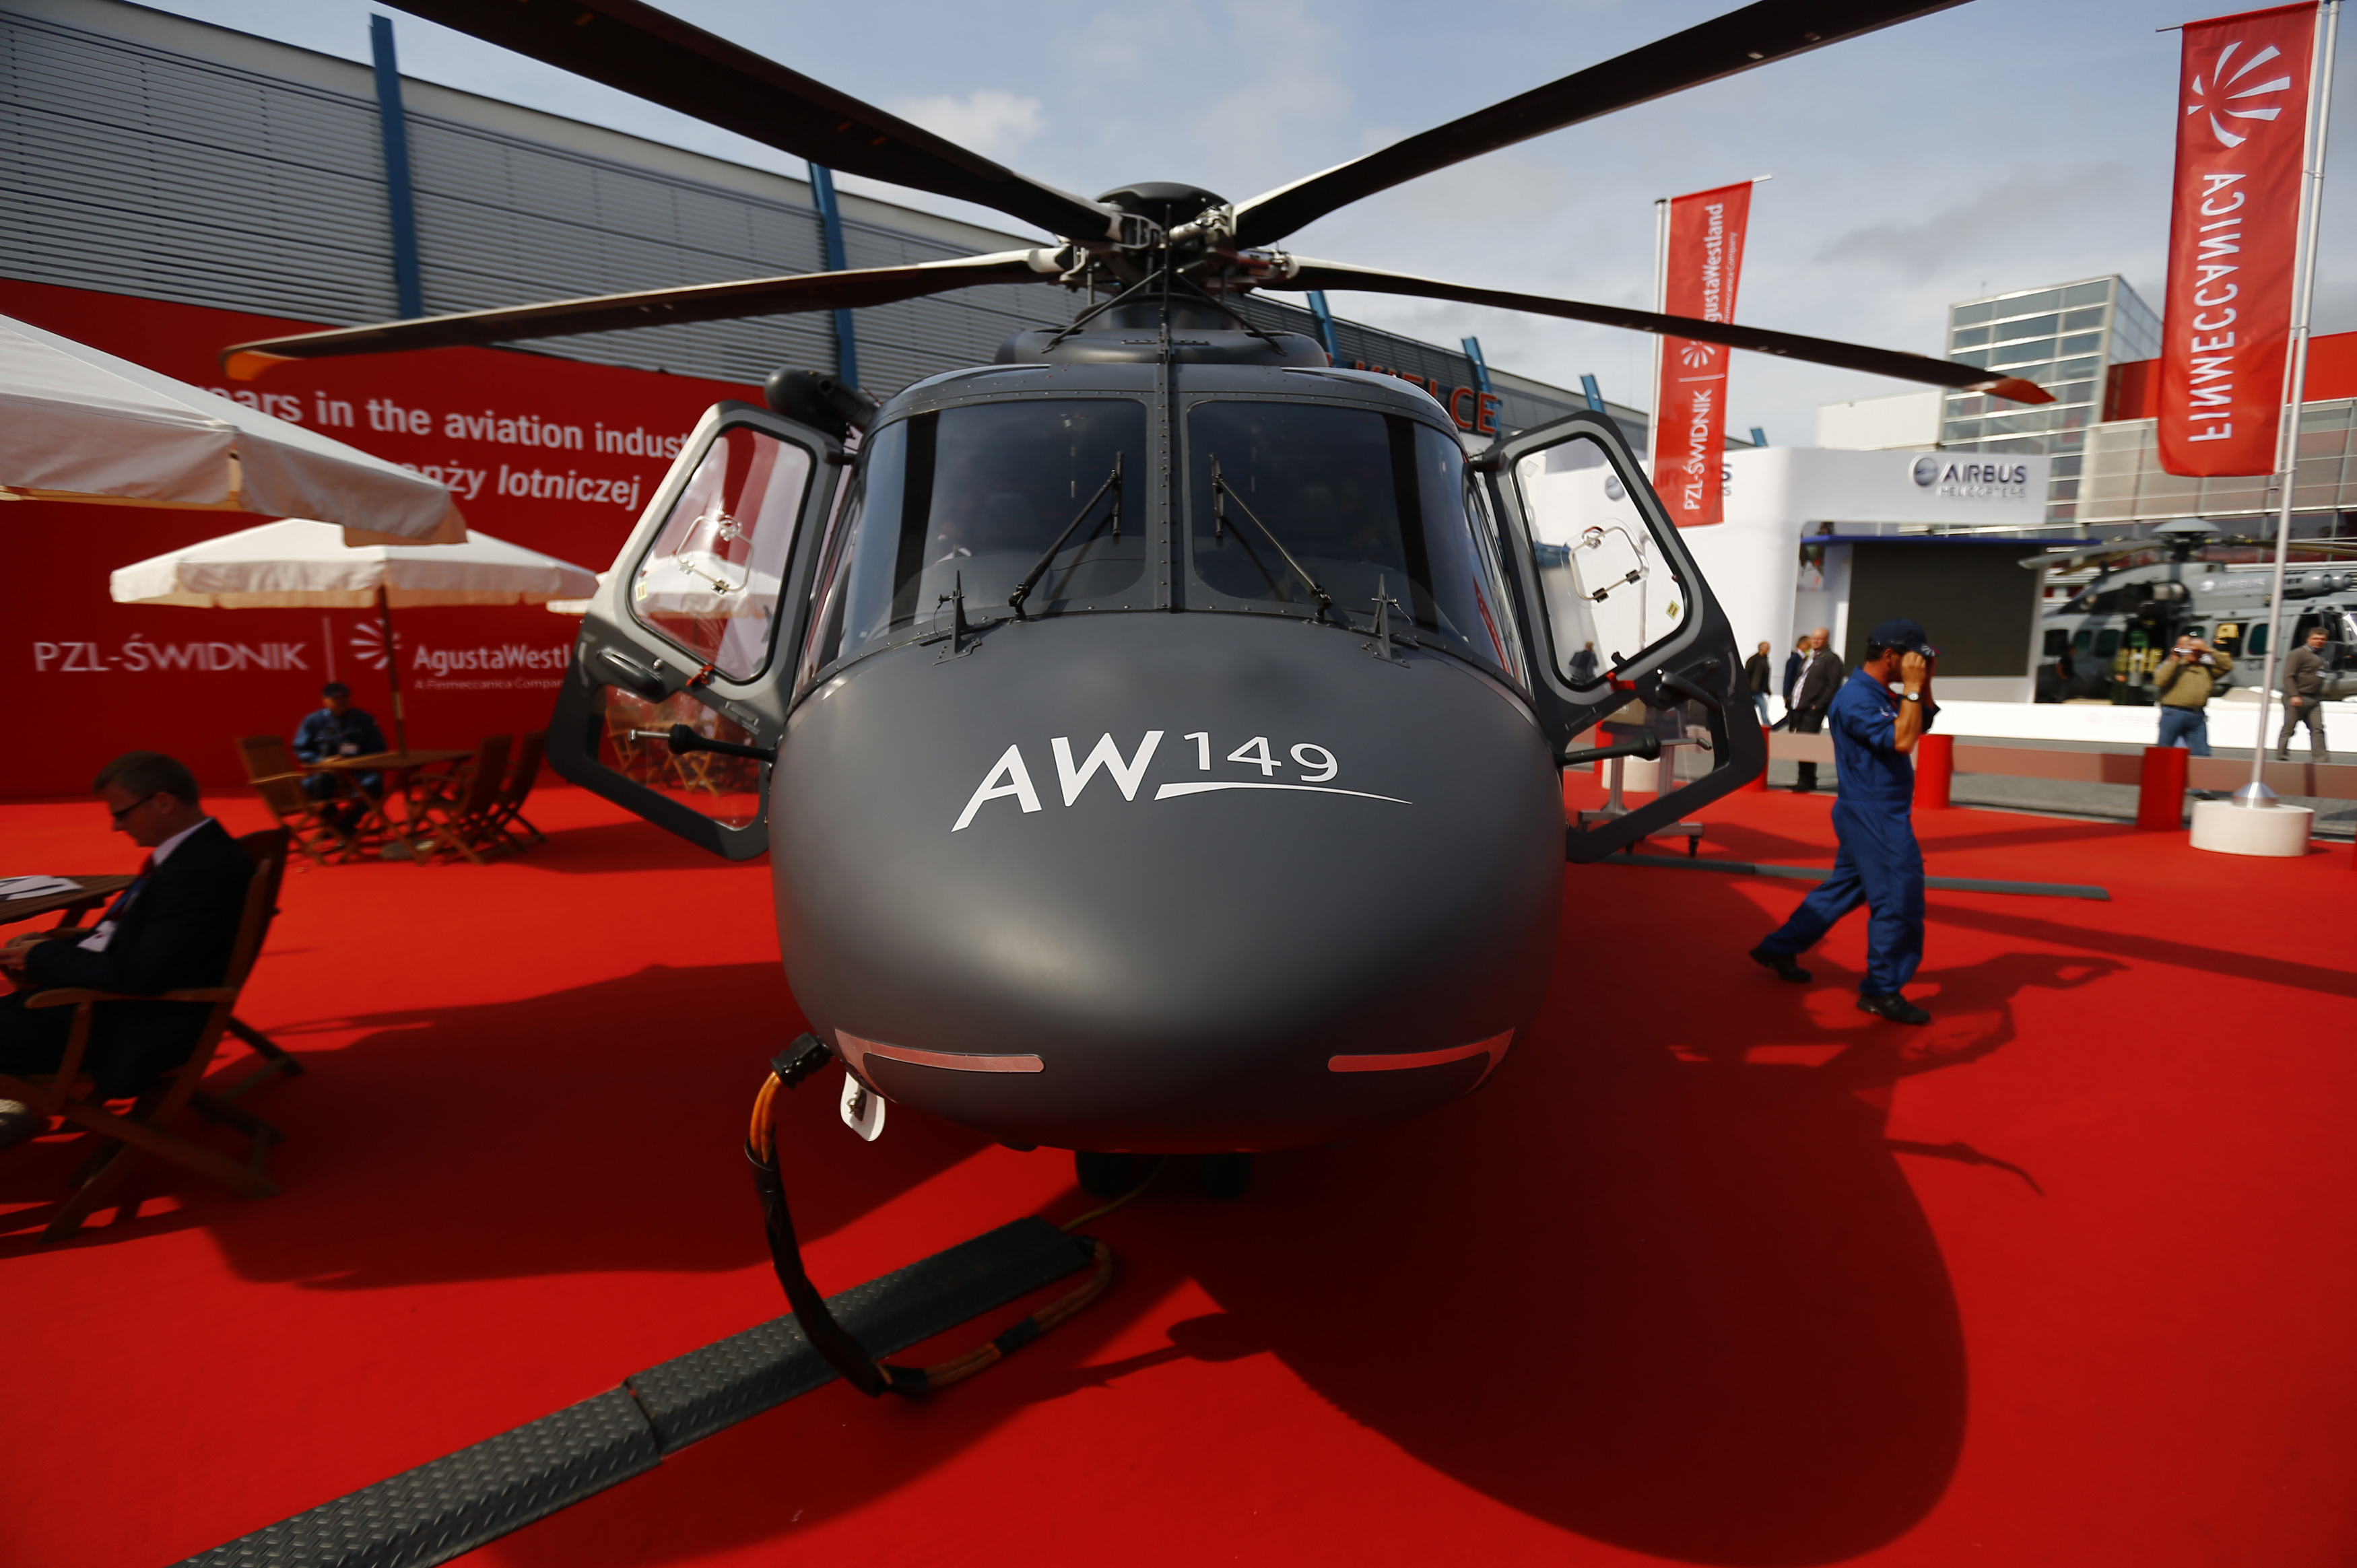 A multi-role military helicopter AW149 manufactured by AugustaWestland is exhibited at an international military fair in Kielce